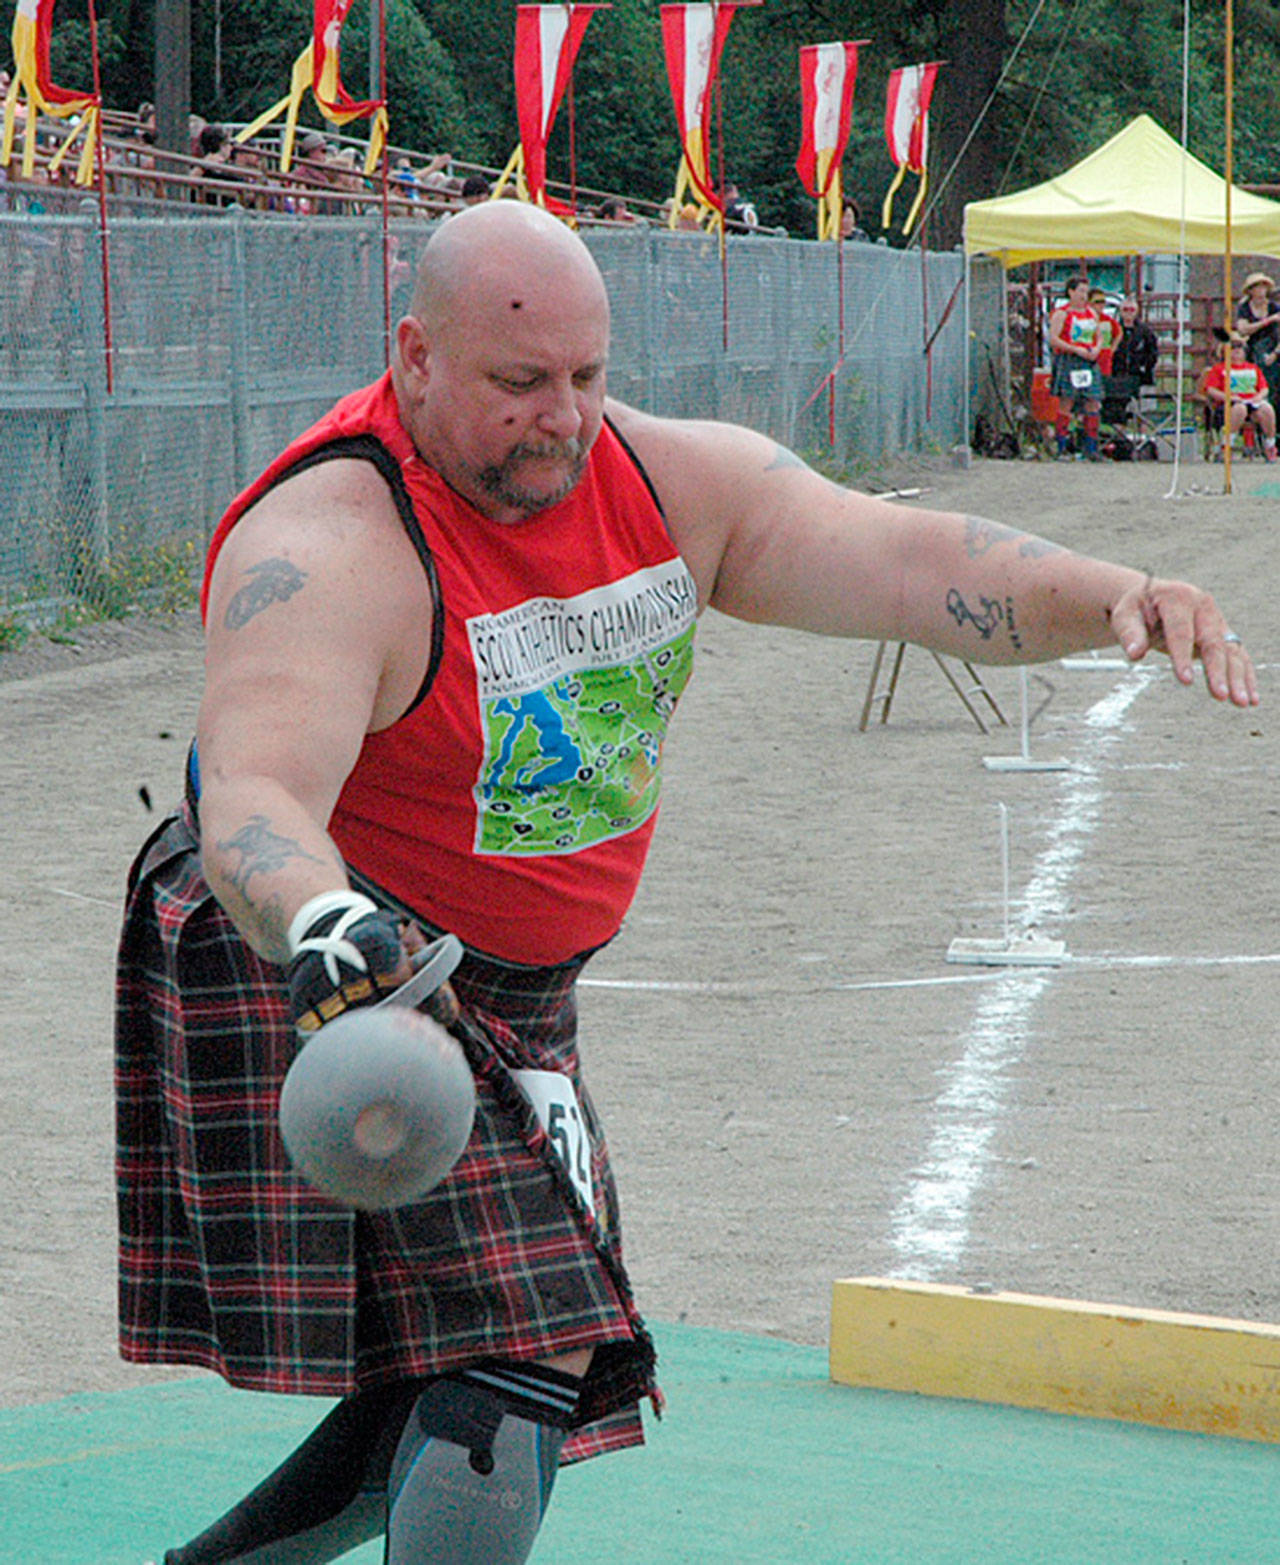 Enumclaw will be busy with Street Fair, Highland Games